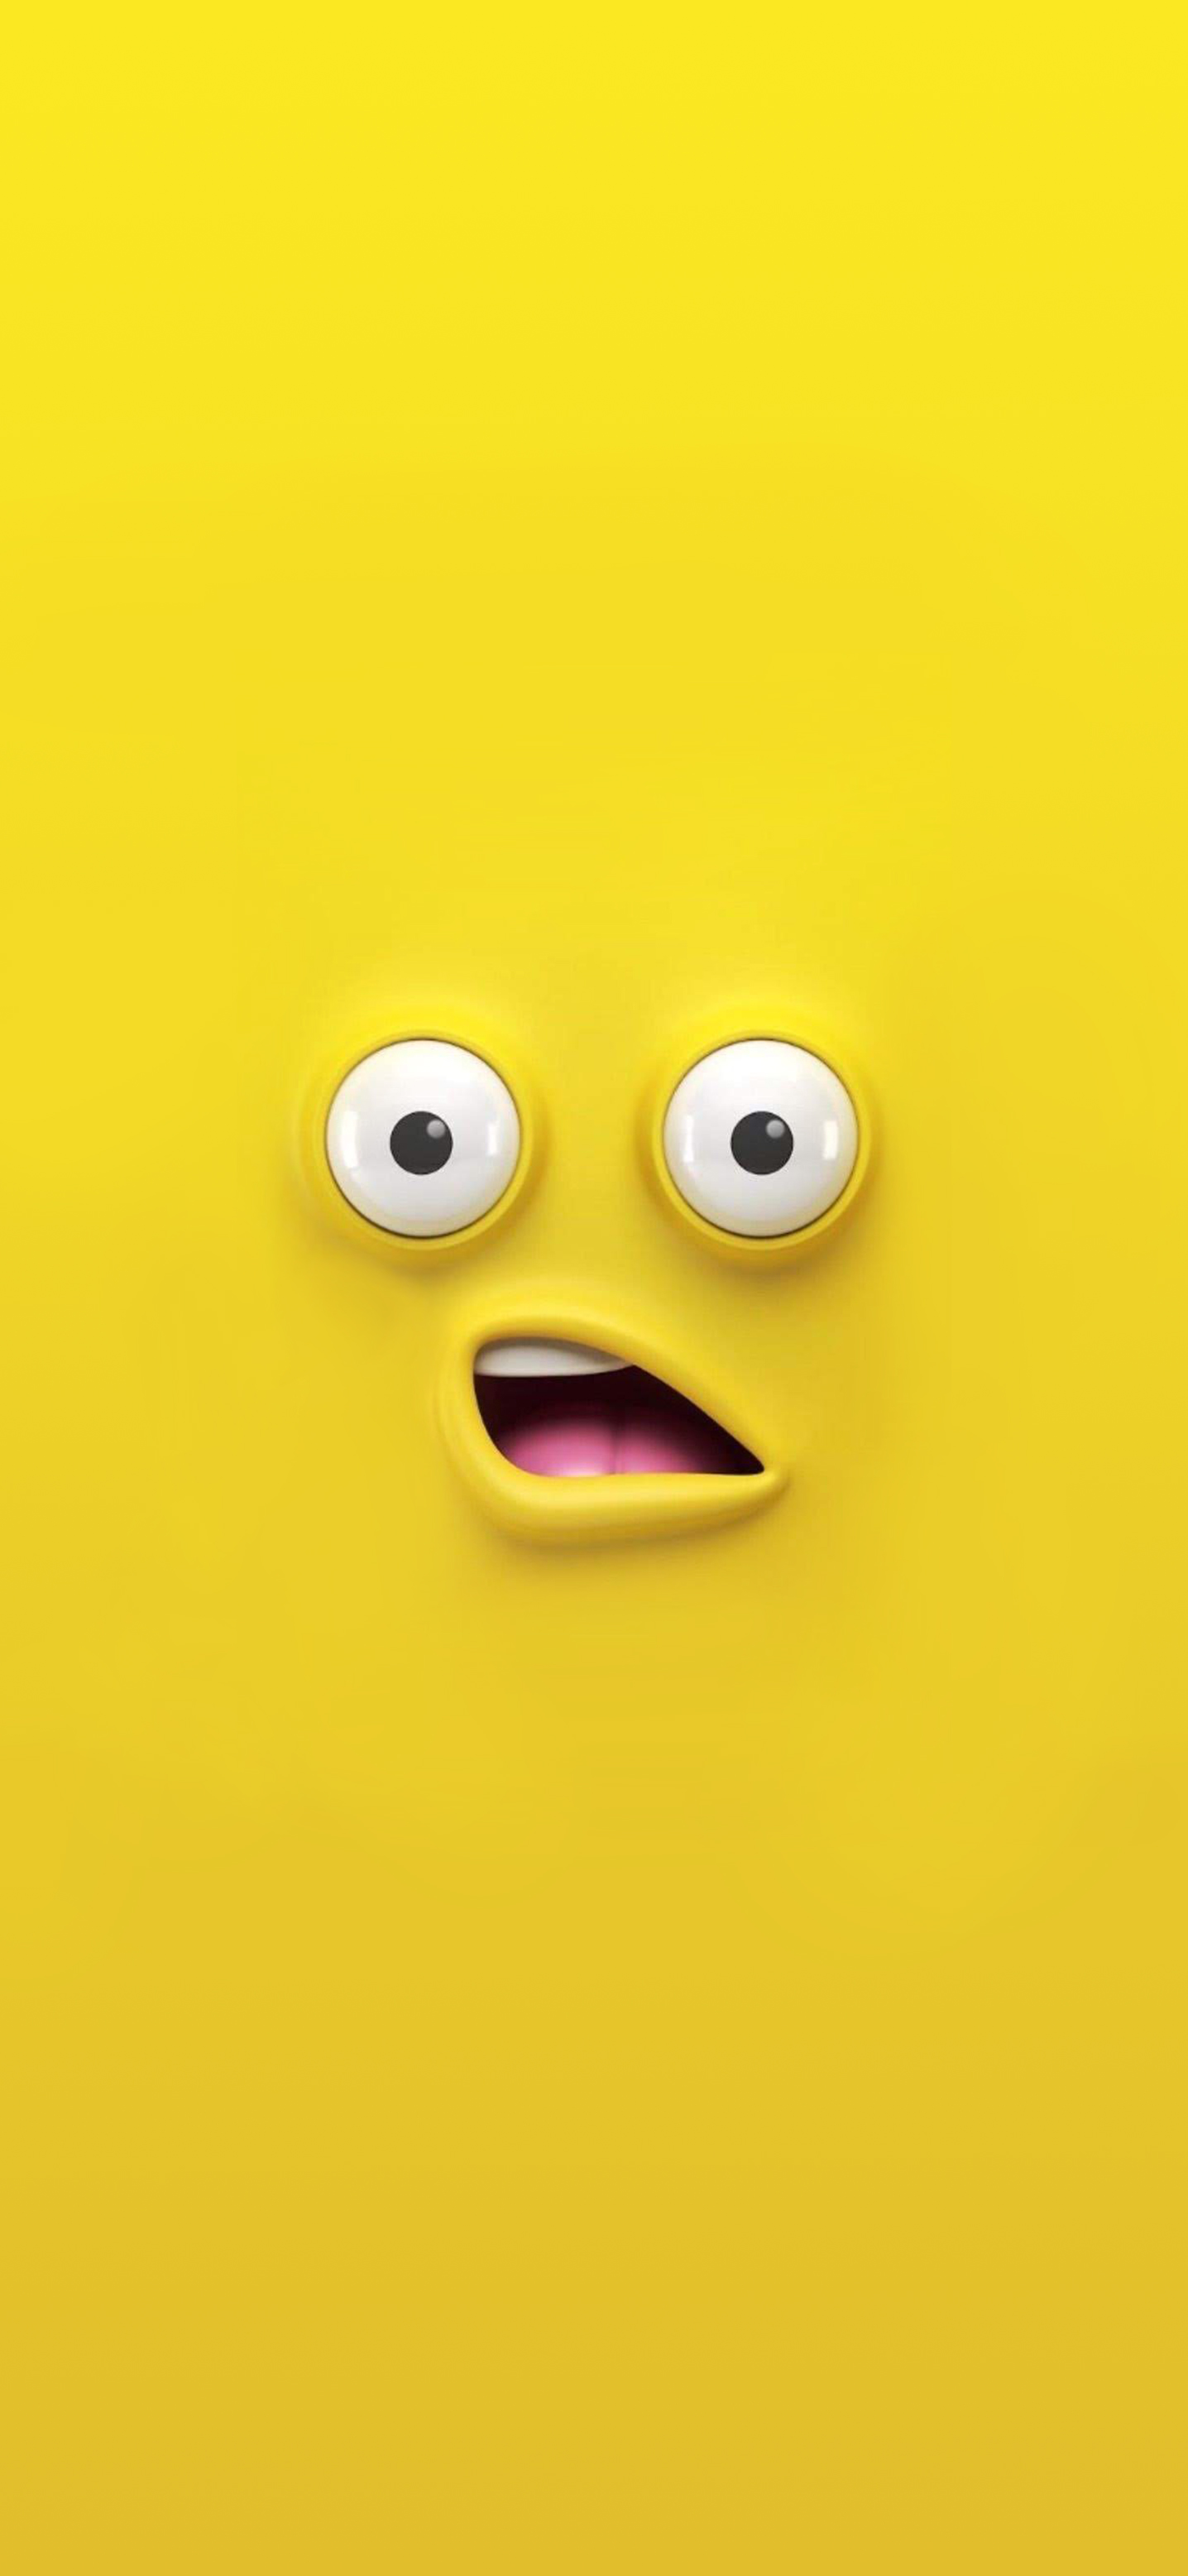 294486 Cartoon Facial Expression Yellow Emoticon Smile Apple iPhone XR  wallpaper hd 828x1792  Rare Gallery HD Wallpapers